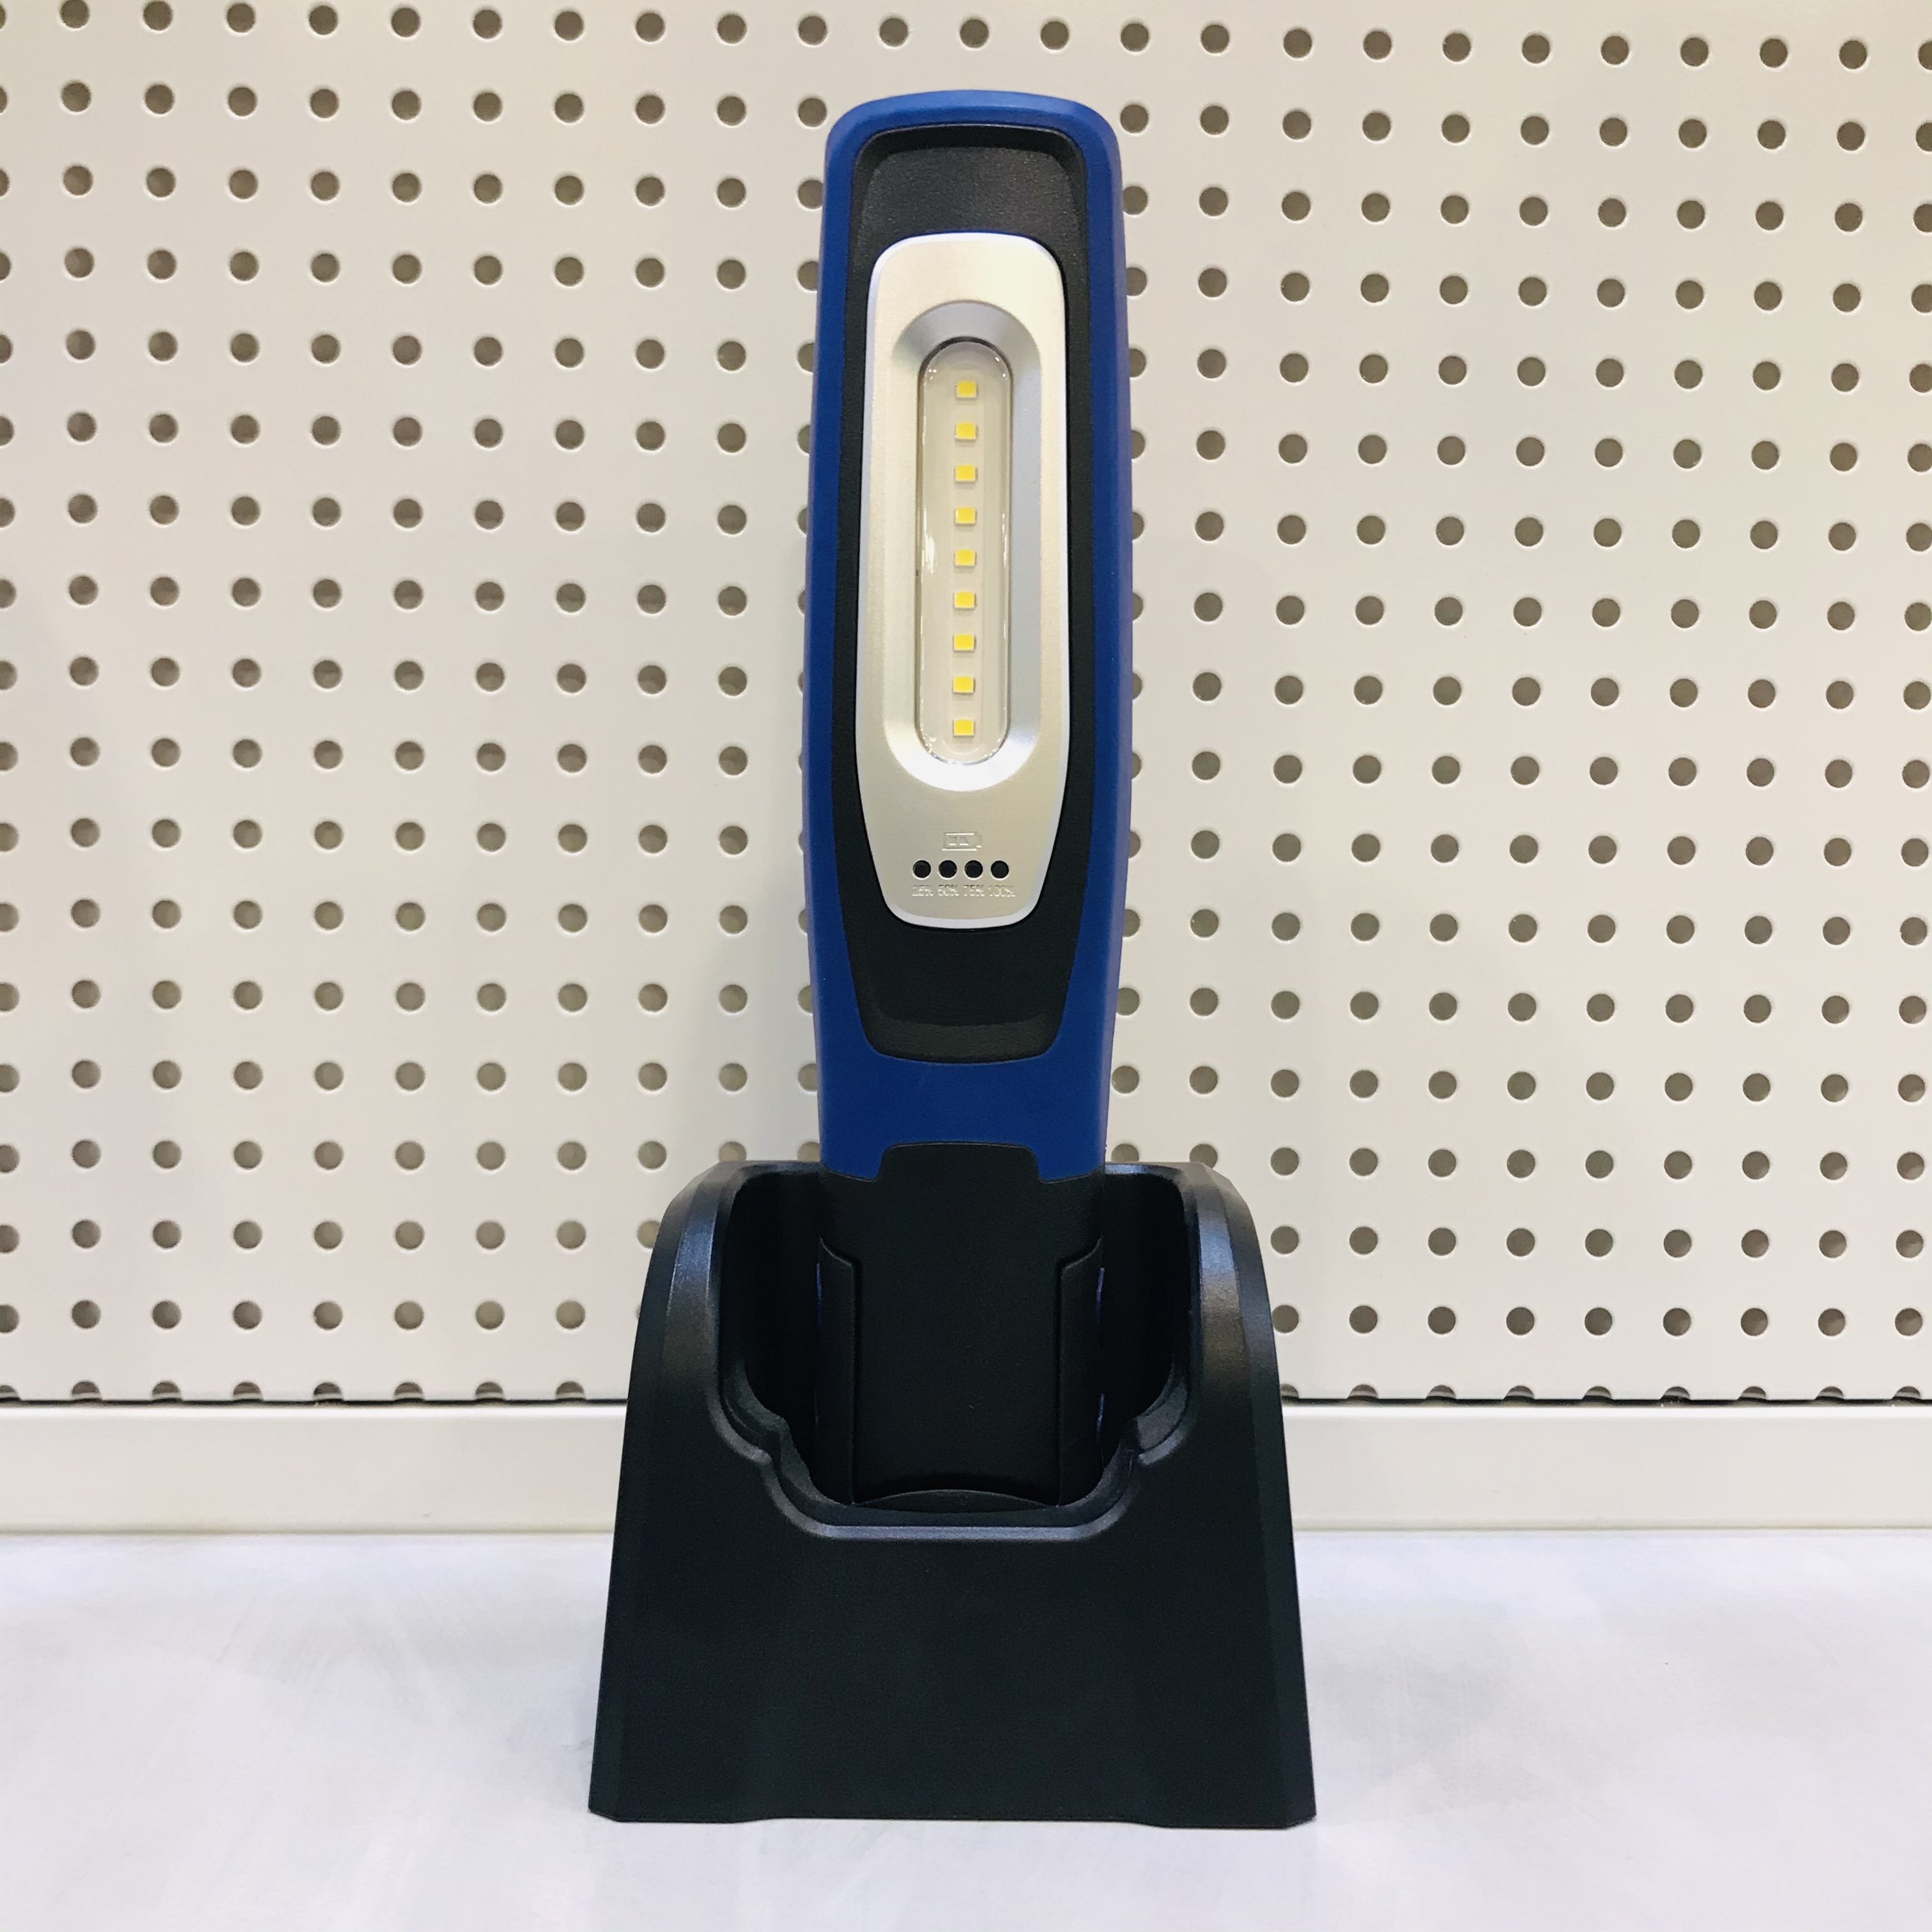 S0321COB & S0322 SMD Wireless Cradle rechargeable handheld work lamp